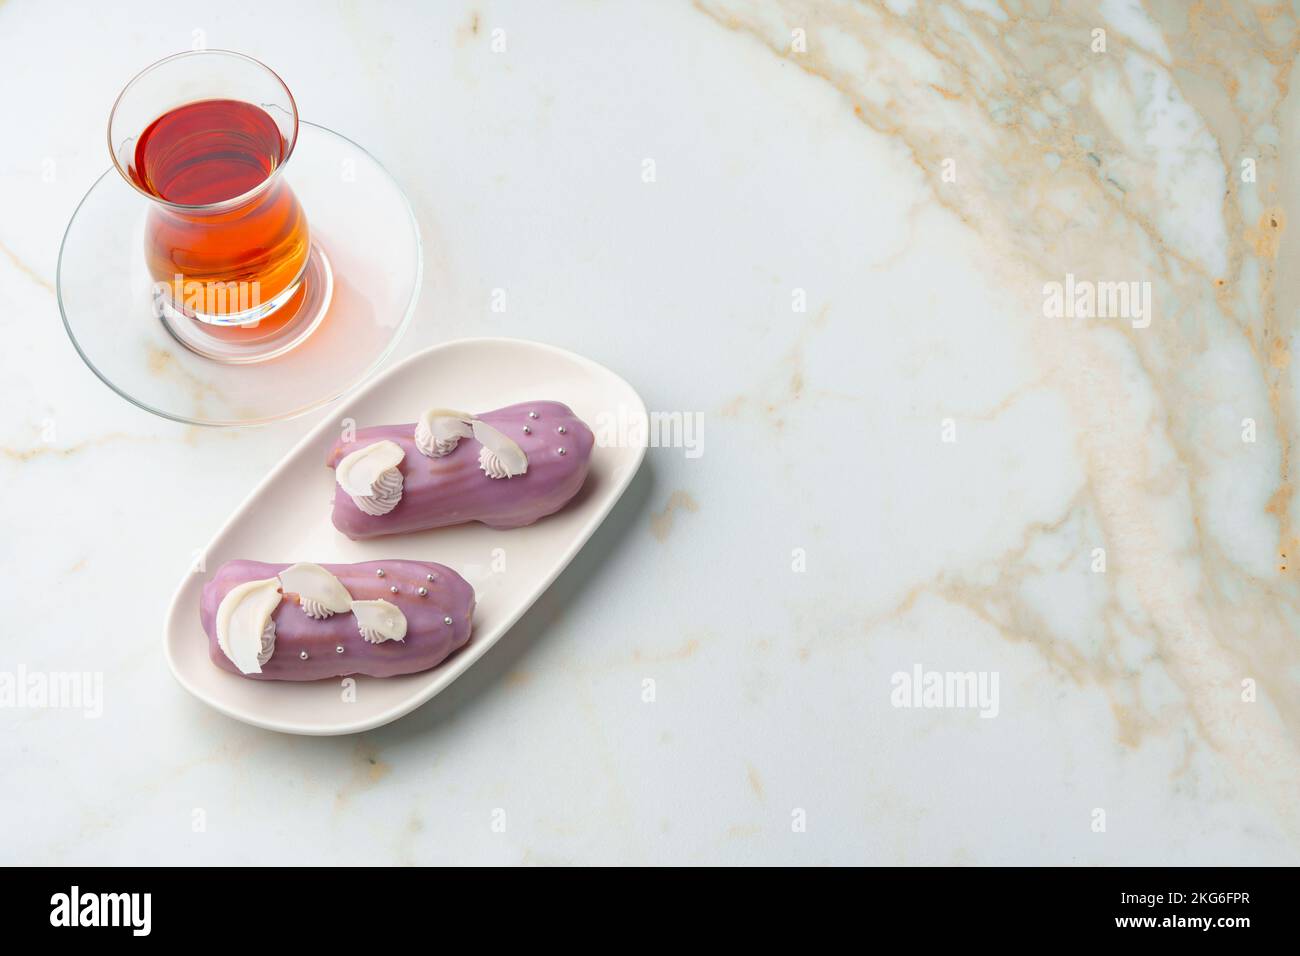 Two eclair cakes with violet frosting on white plate Stock Photo